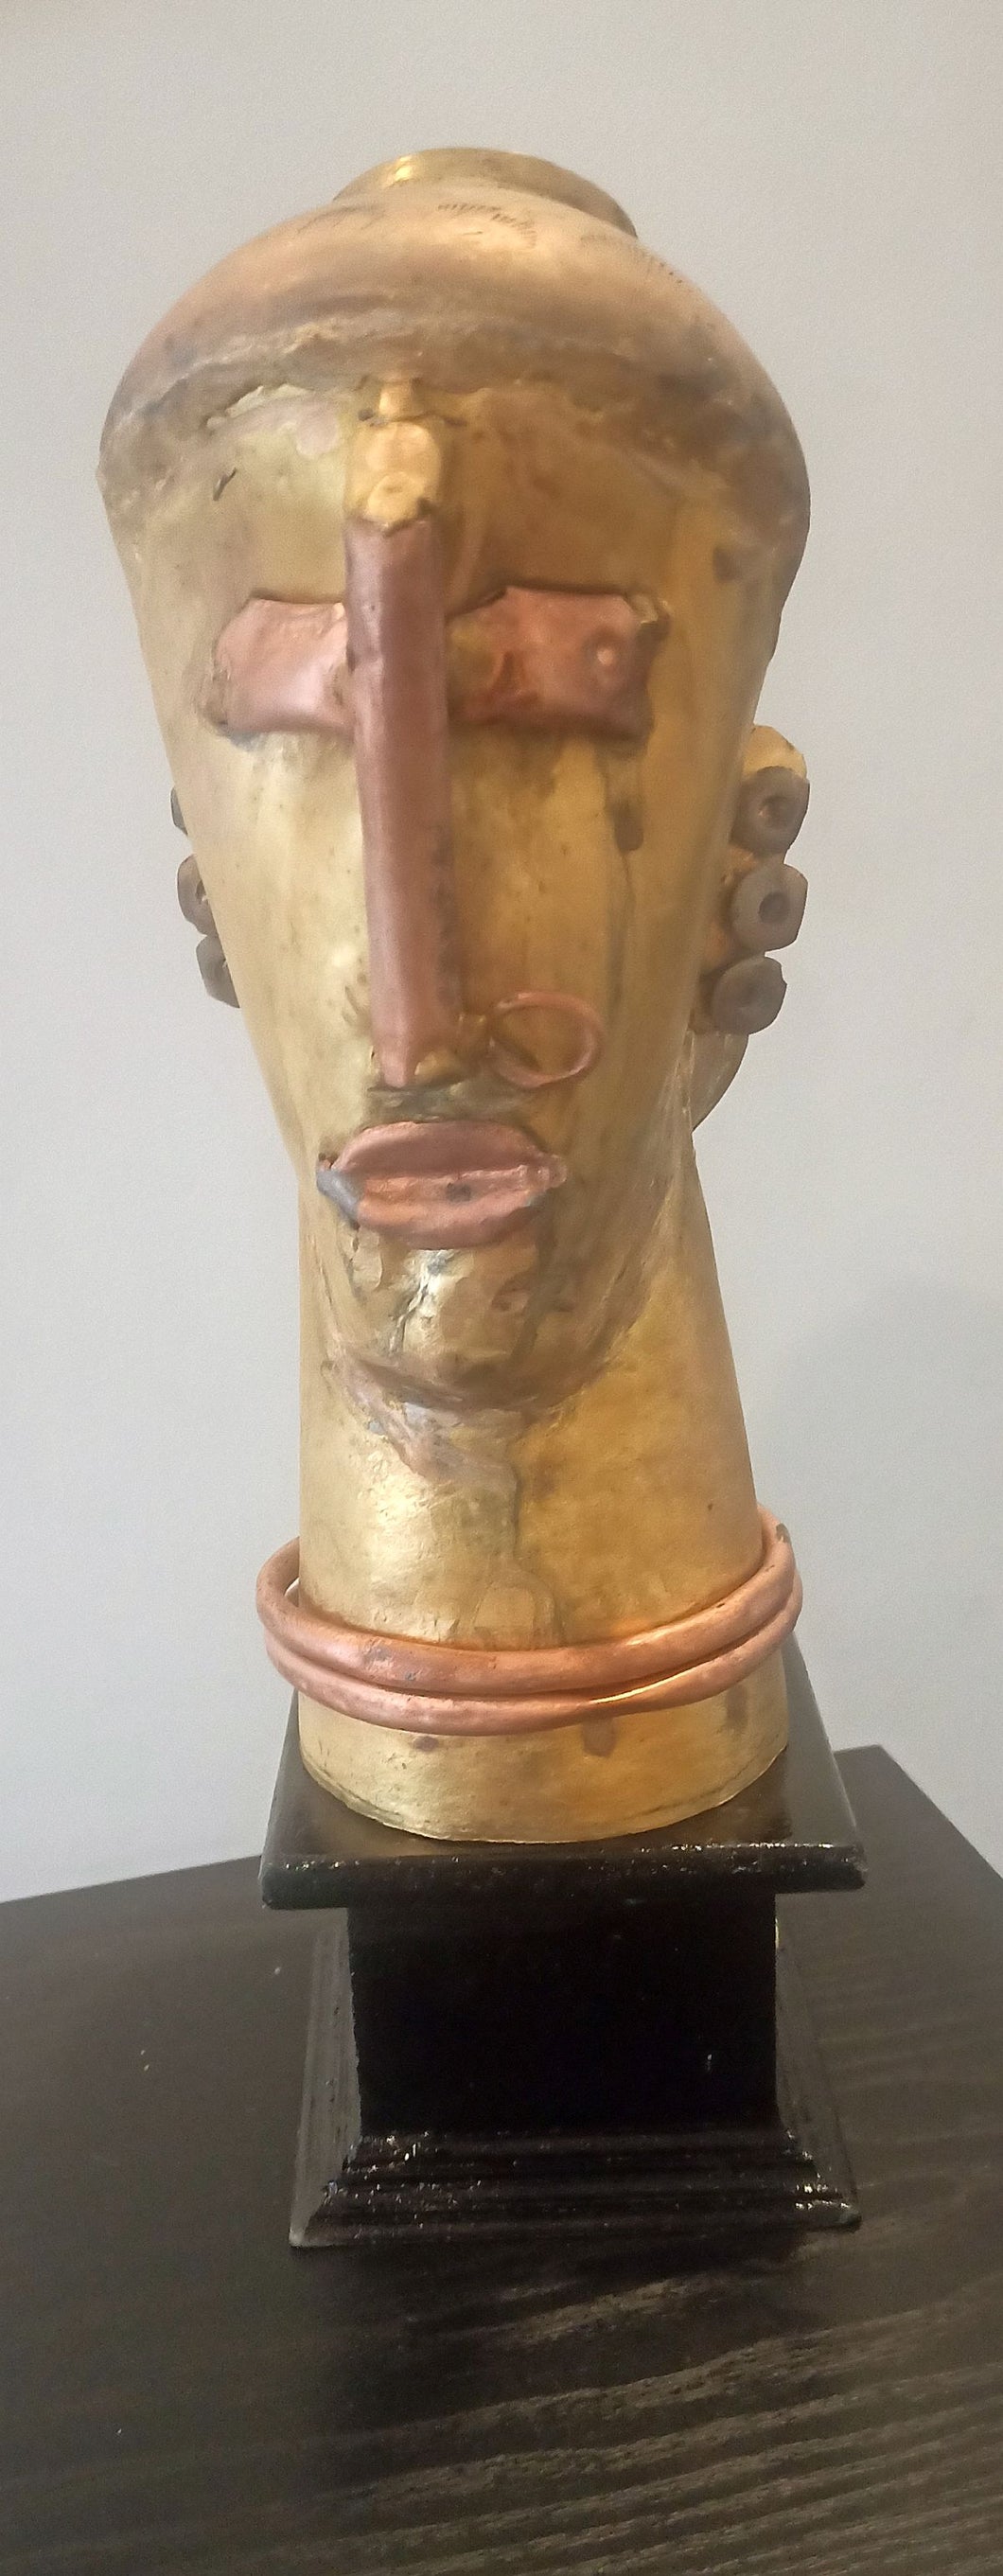 Head of a tribal woman : Mixed metal sculpture by Tapos Das